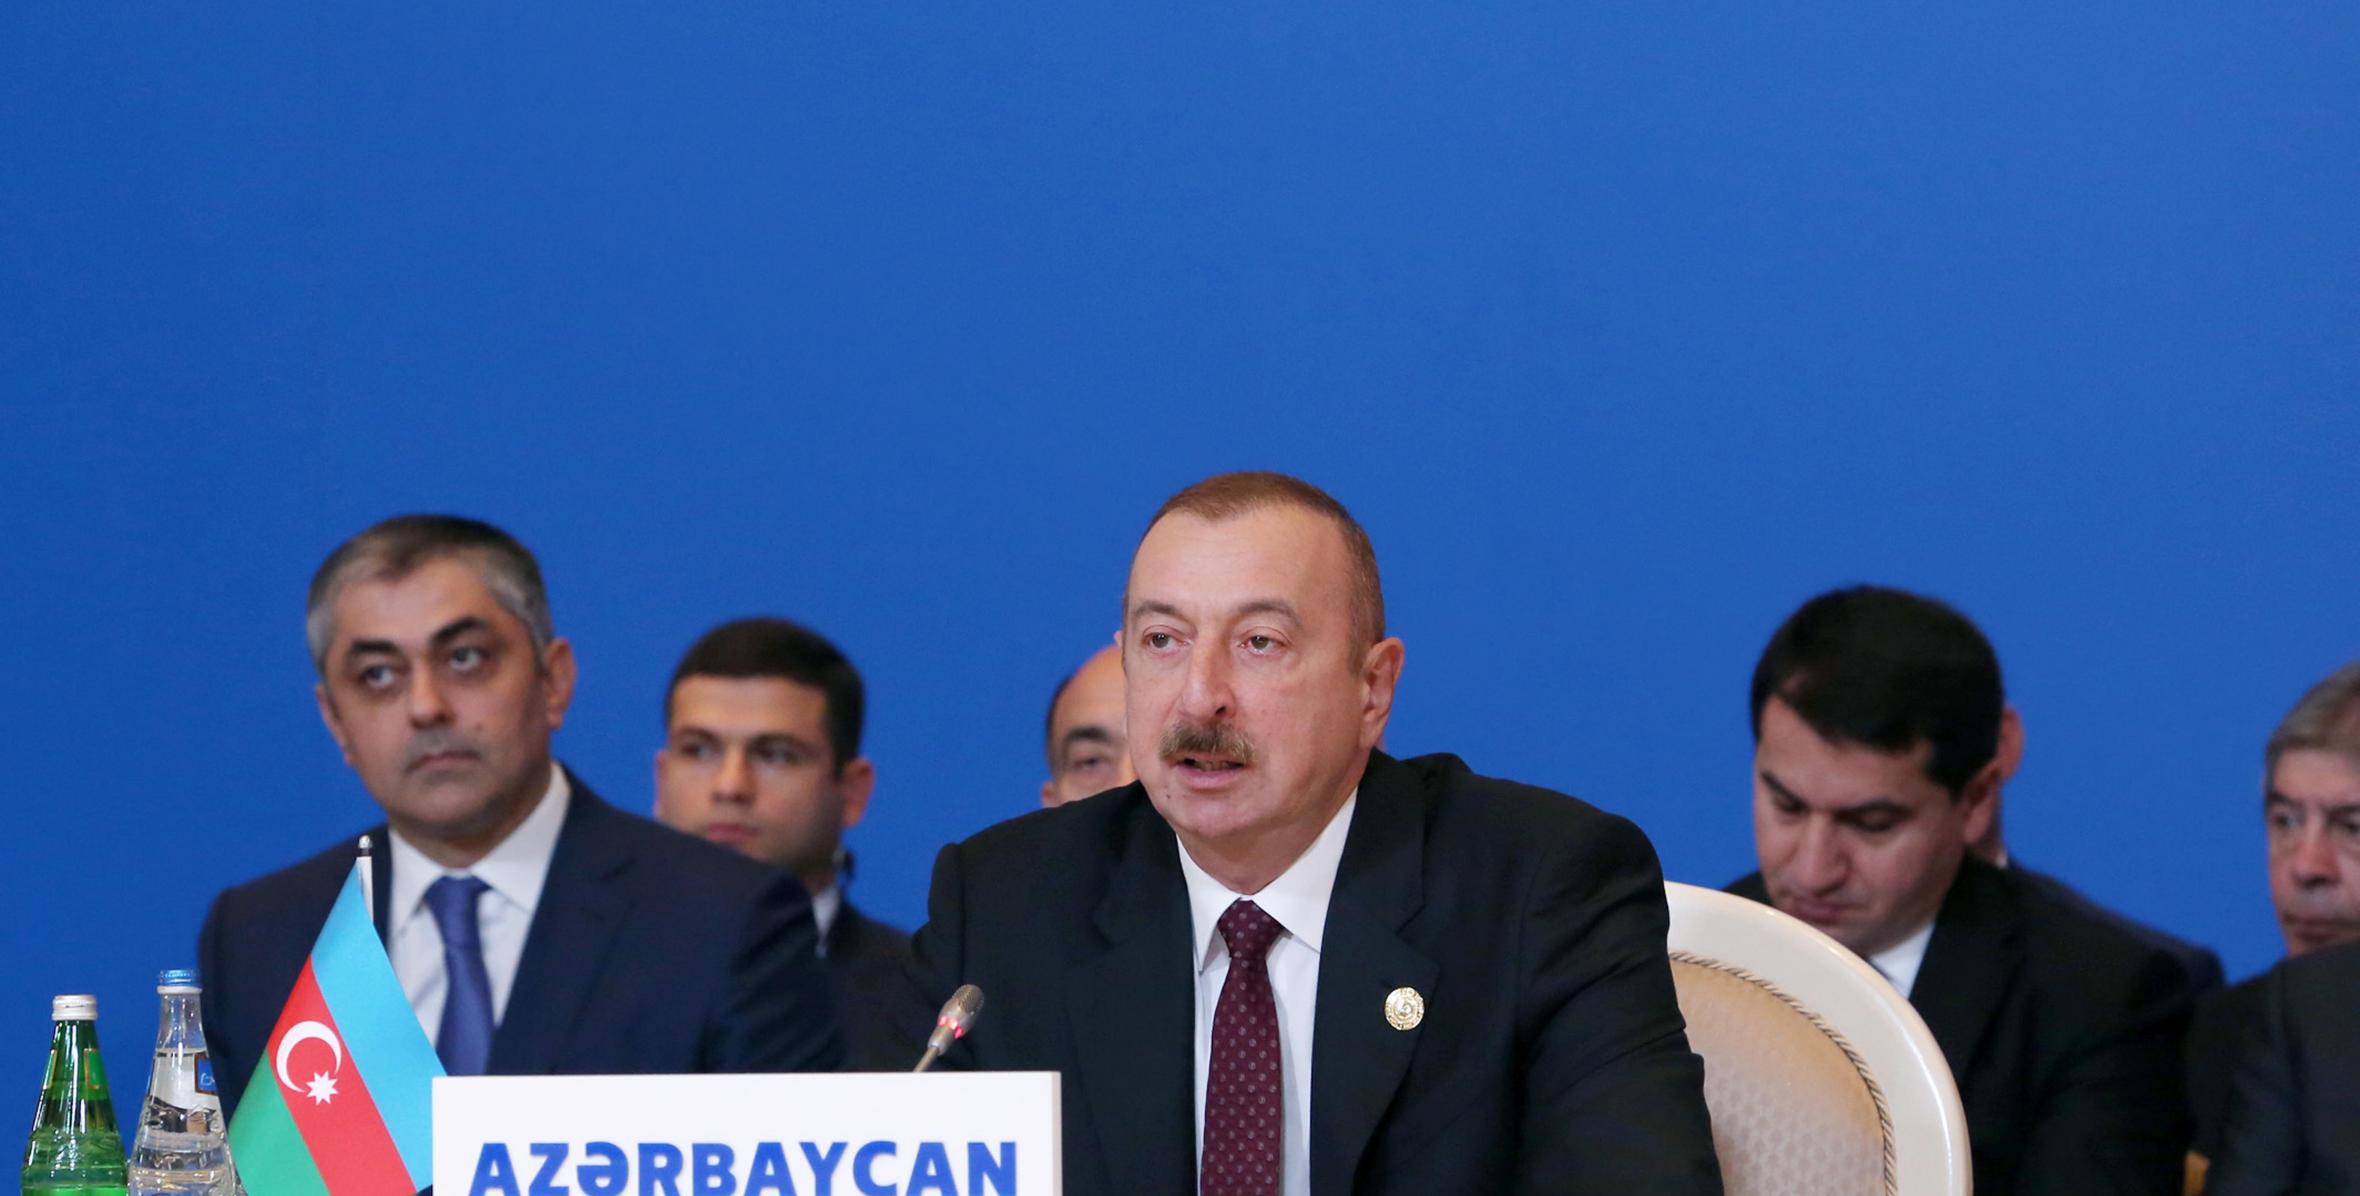 Speech by Ilham Aliyev at the7th Summit of Cooperation Council of Turkic-Speaking States